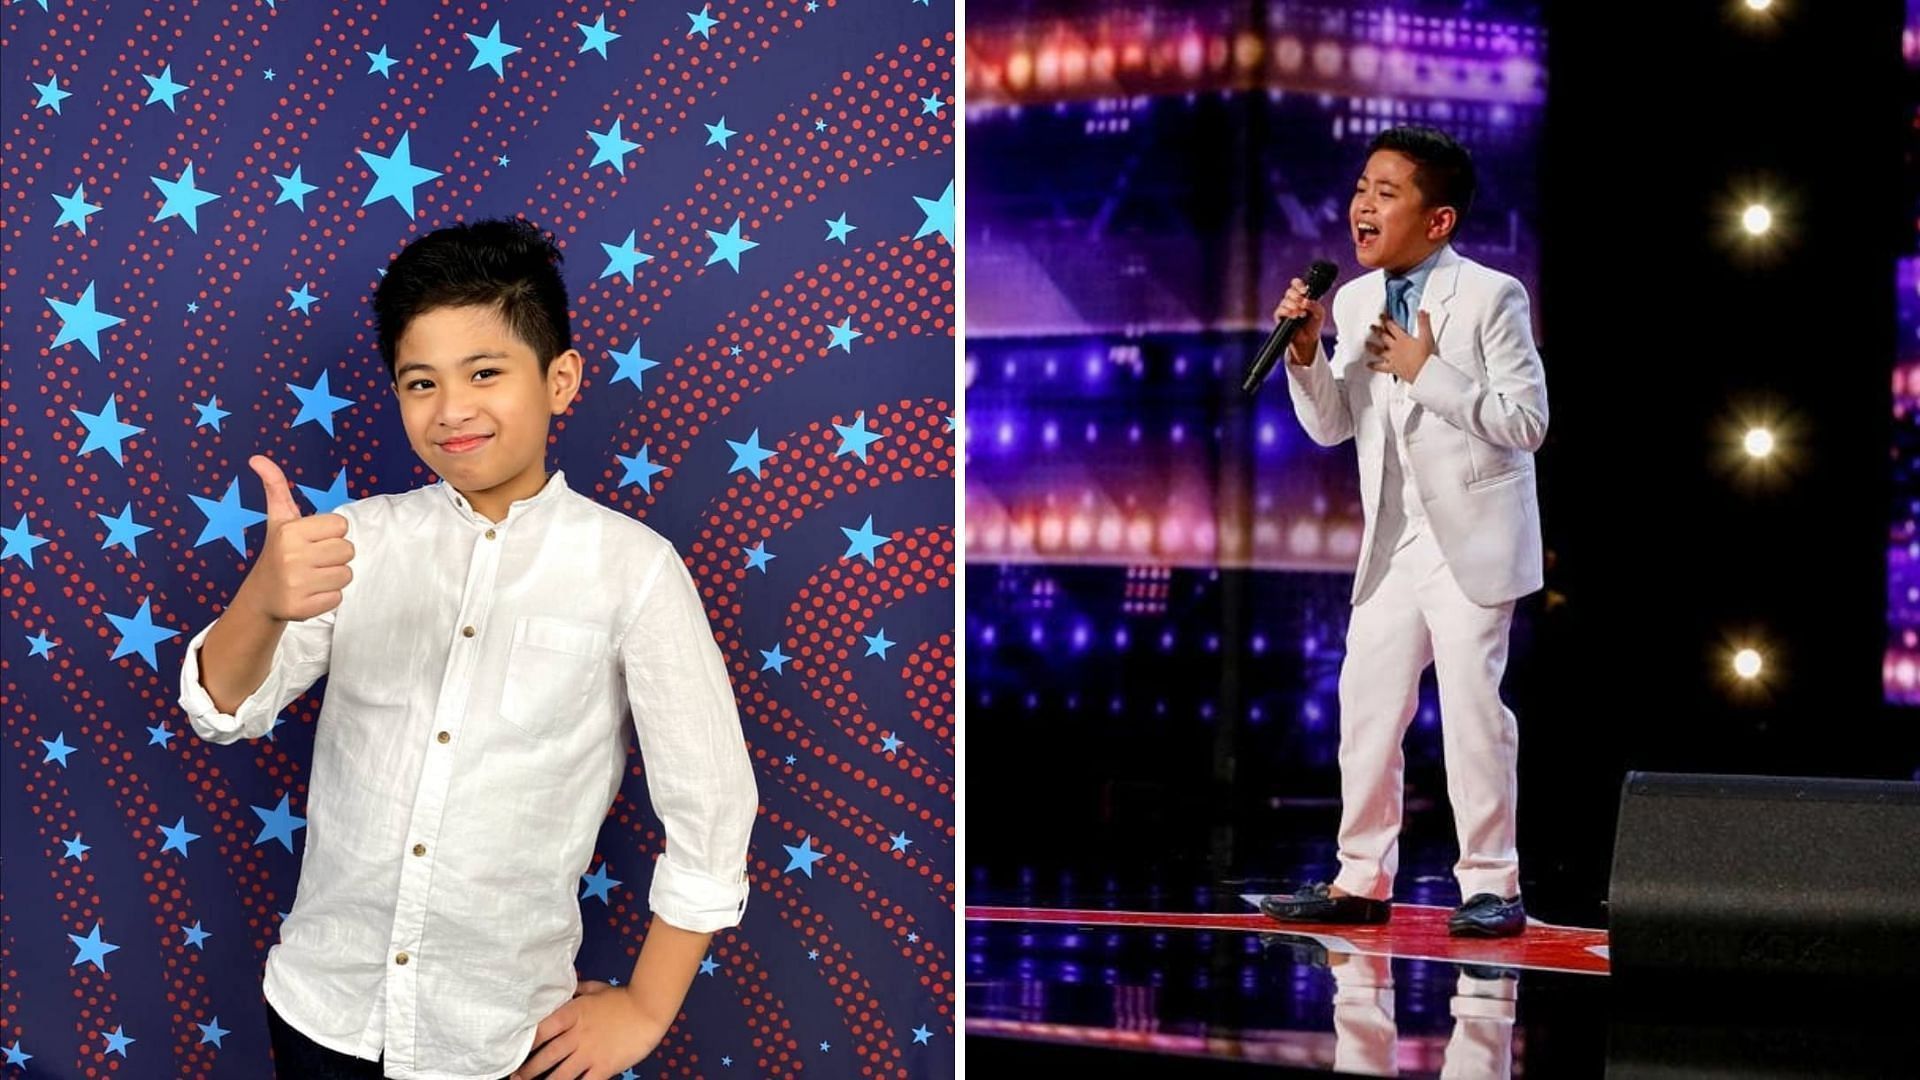 Peter Rosalita wows judges with his singing on AGT: All-Stars